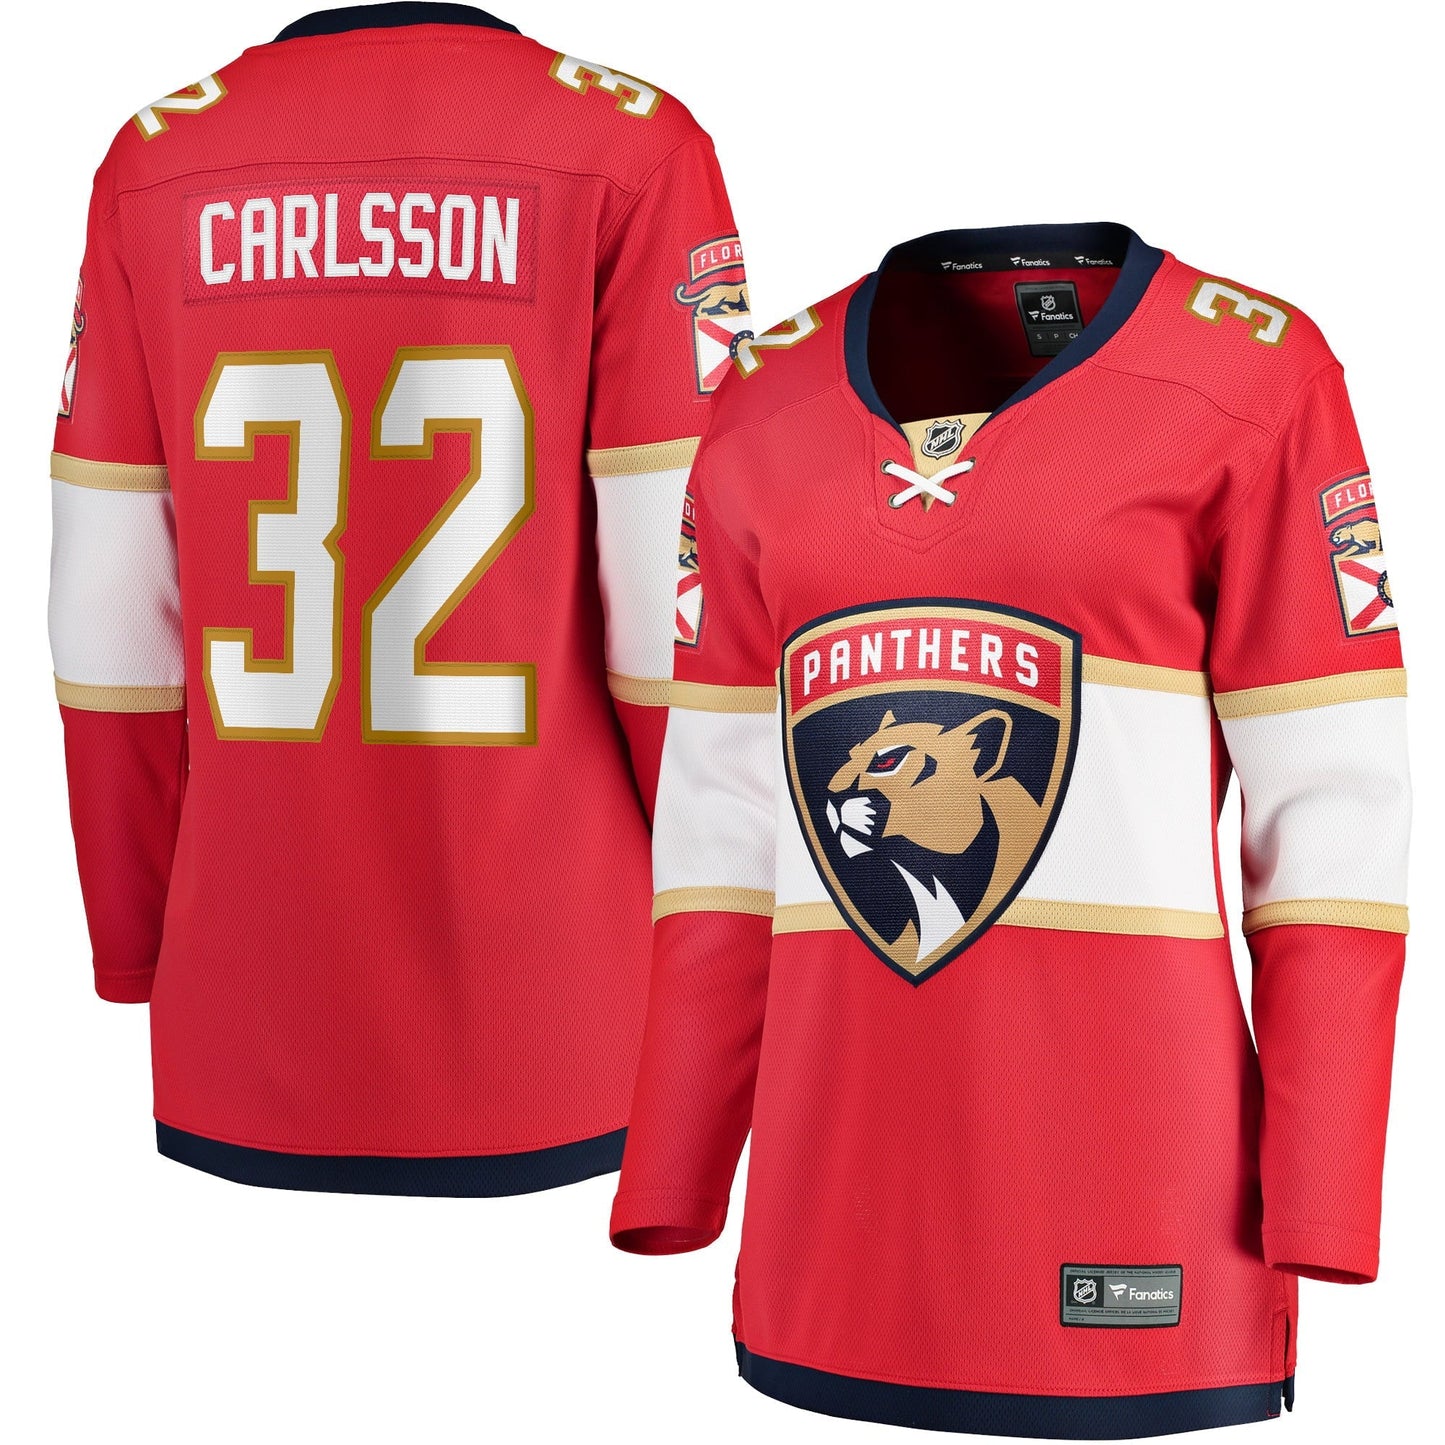 Women's Fanatics Branded Lucas Carlsson Red Florida Panthers Home Breakaway Player Jersey